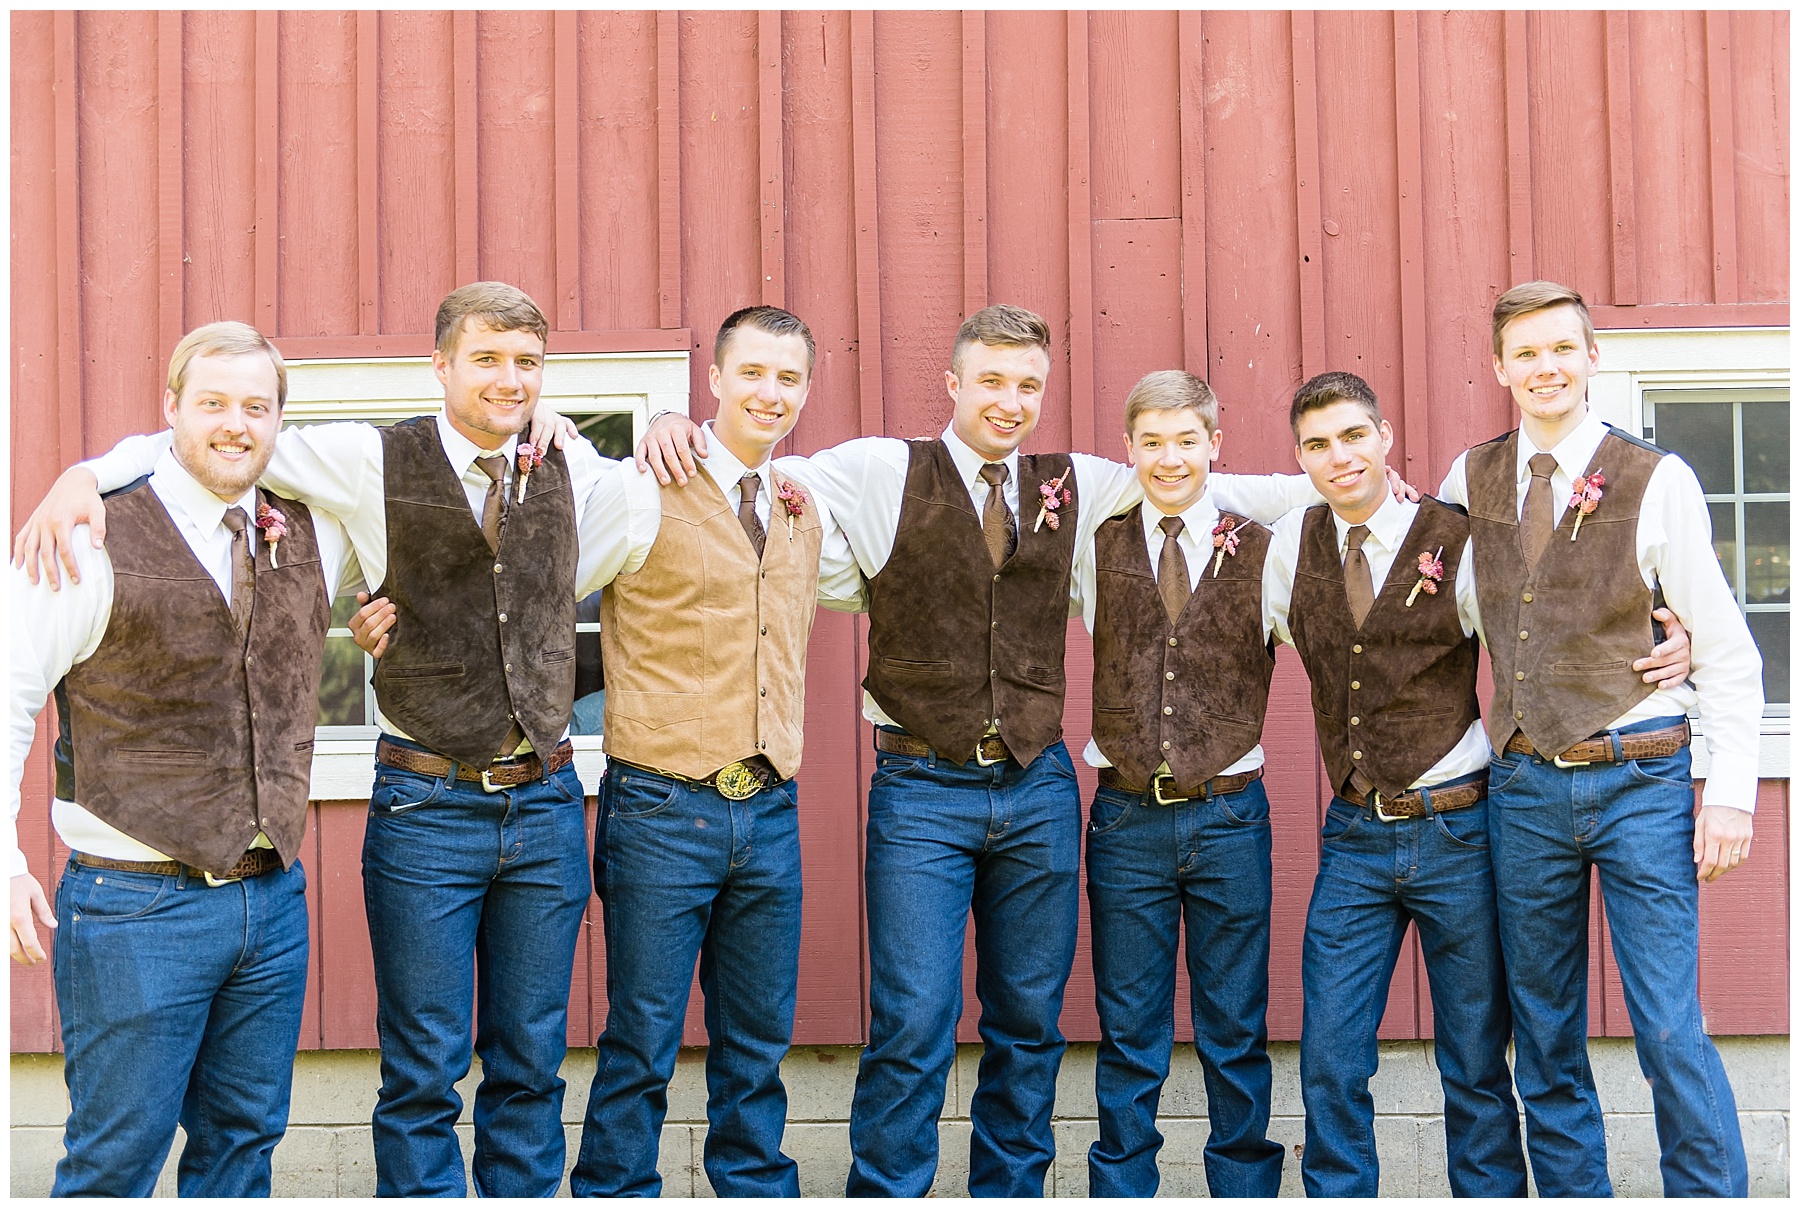 Red Barn at Sycamore Farm Wedding | Courtney Carney Photography